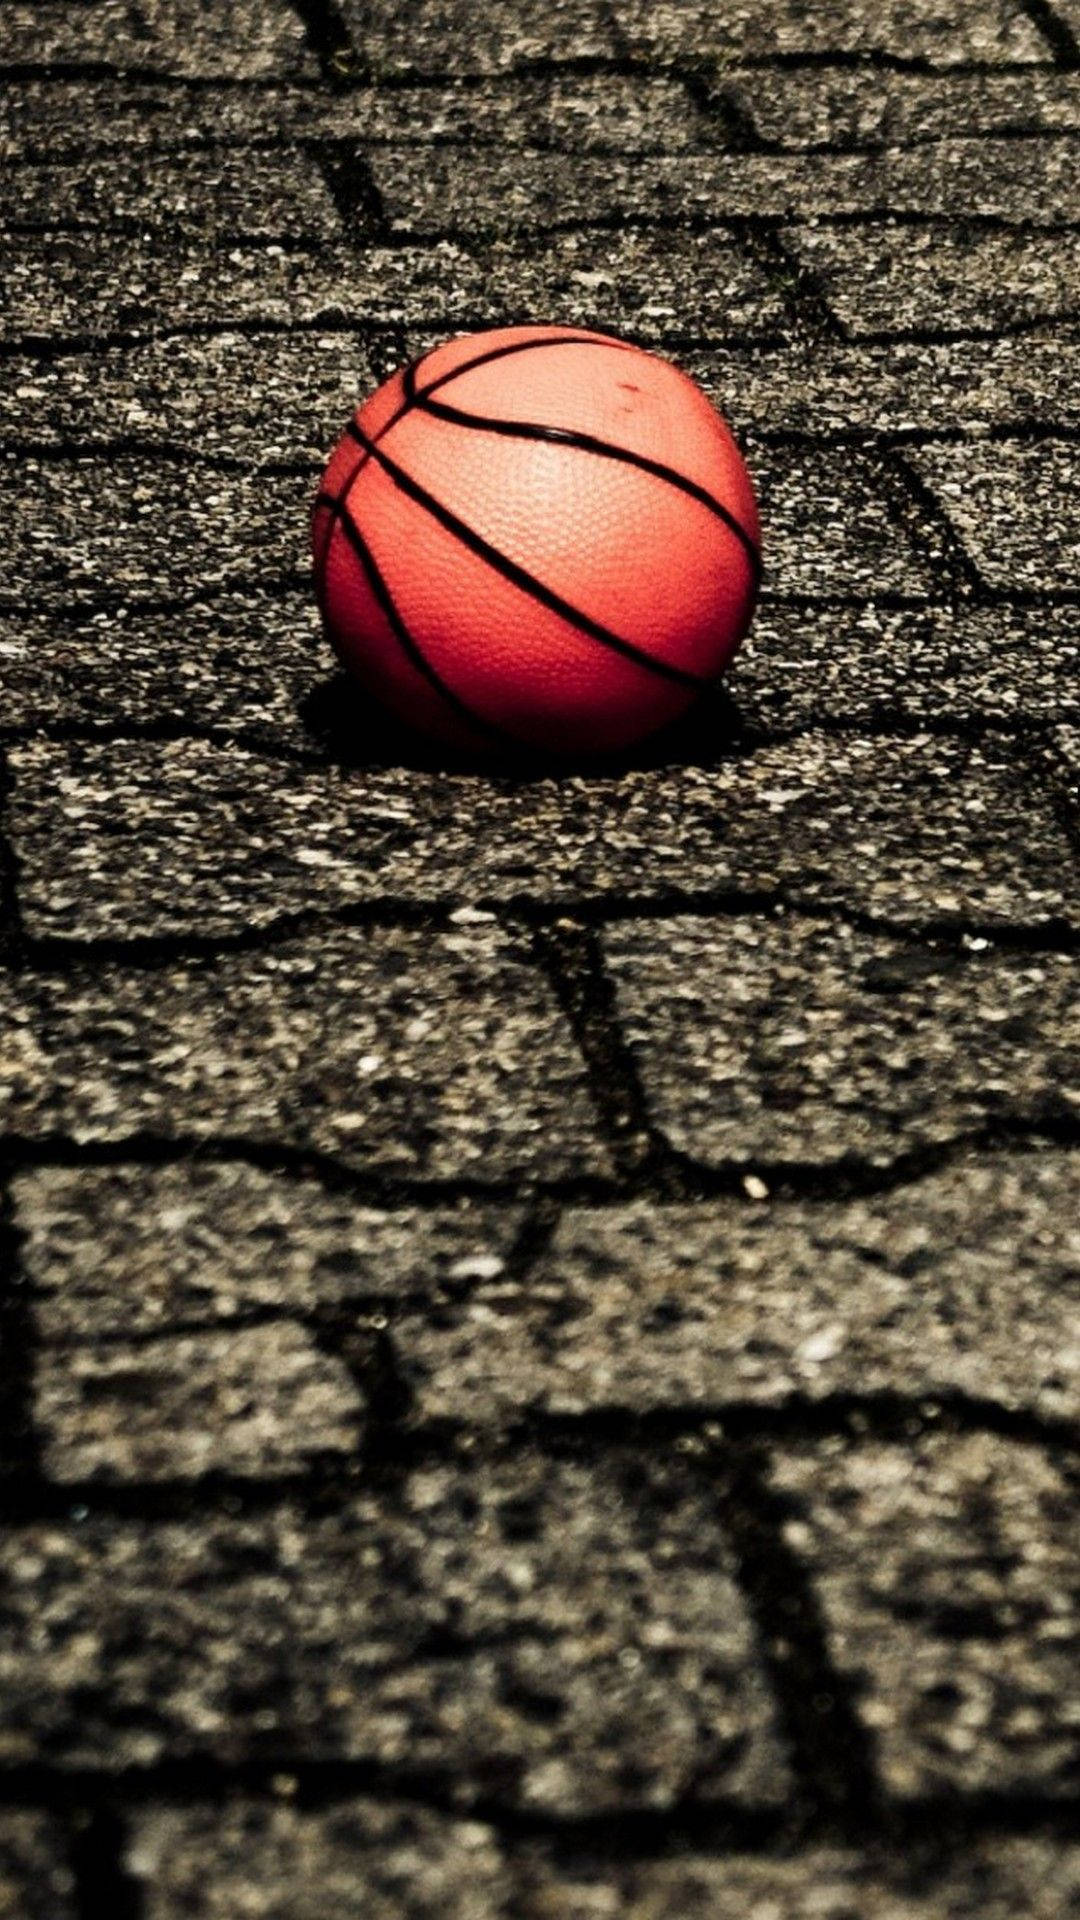 Hd Basketball In Ground